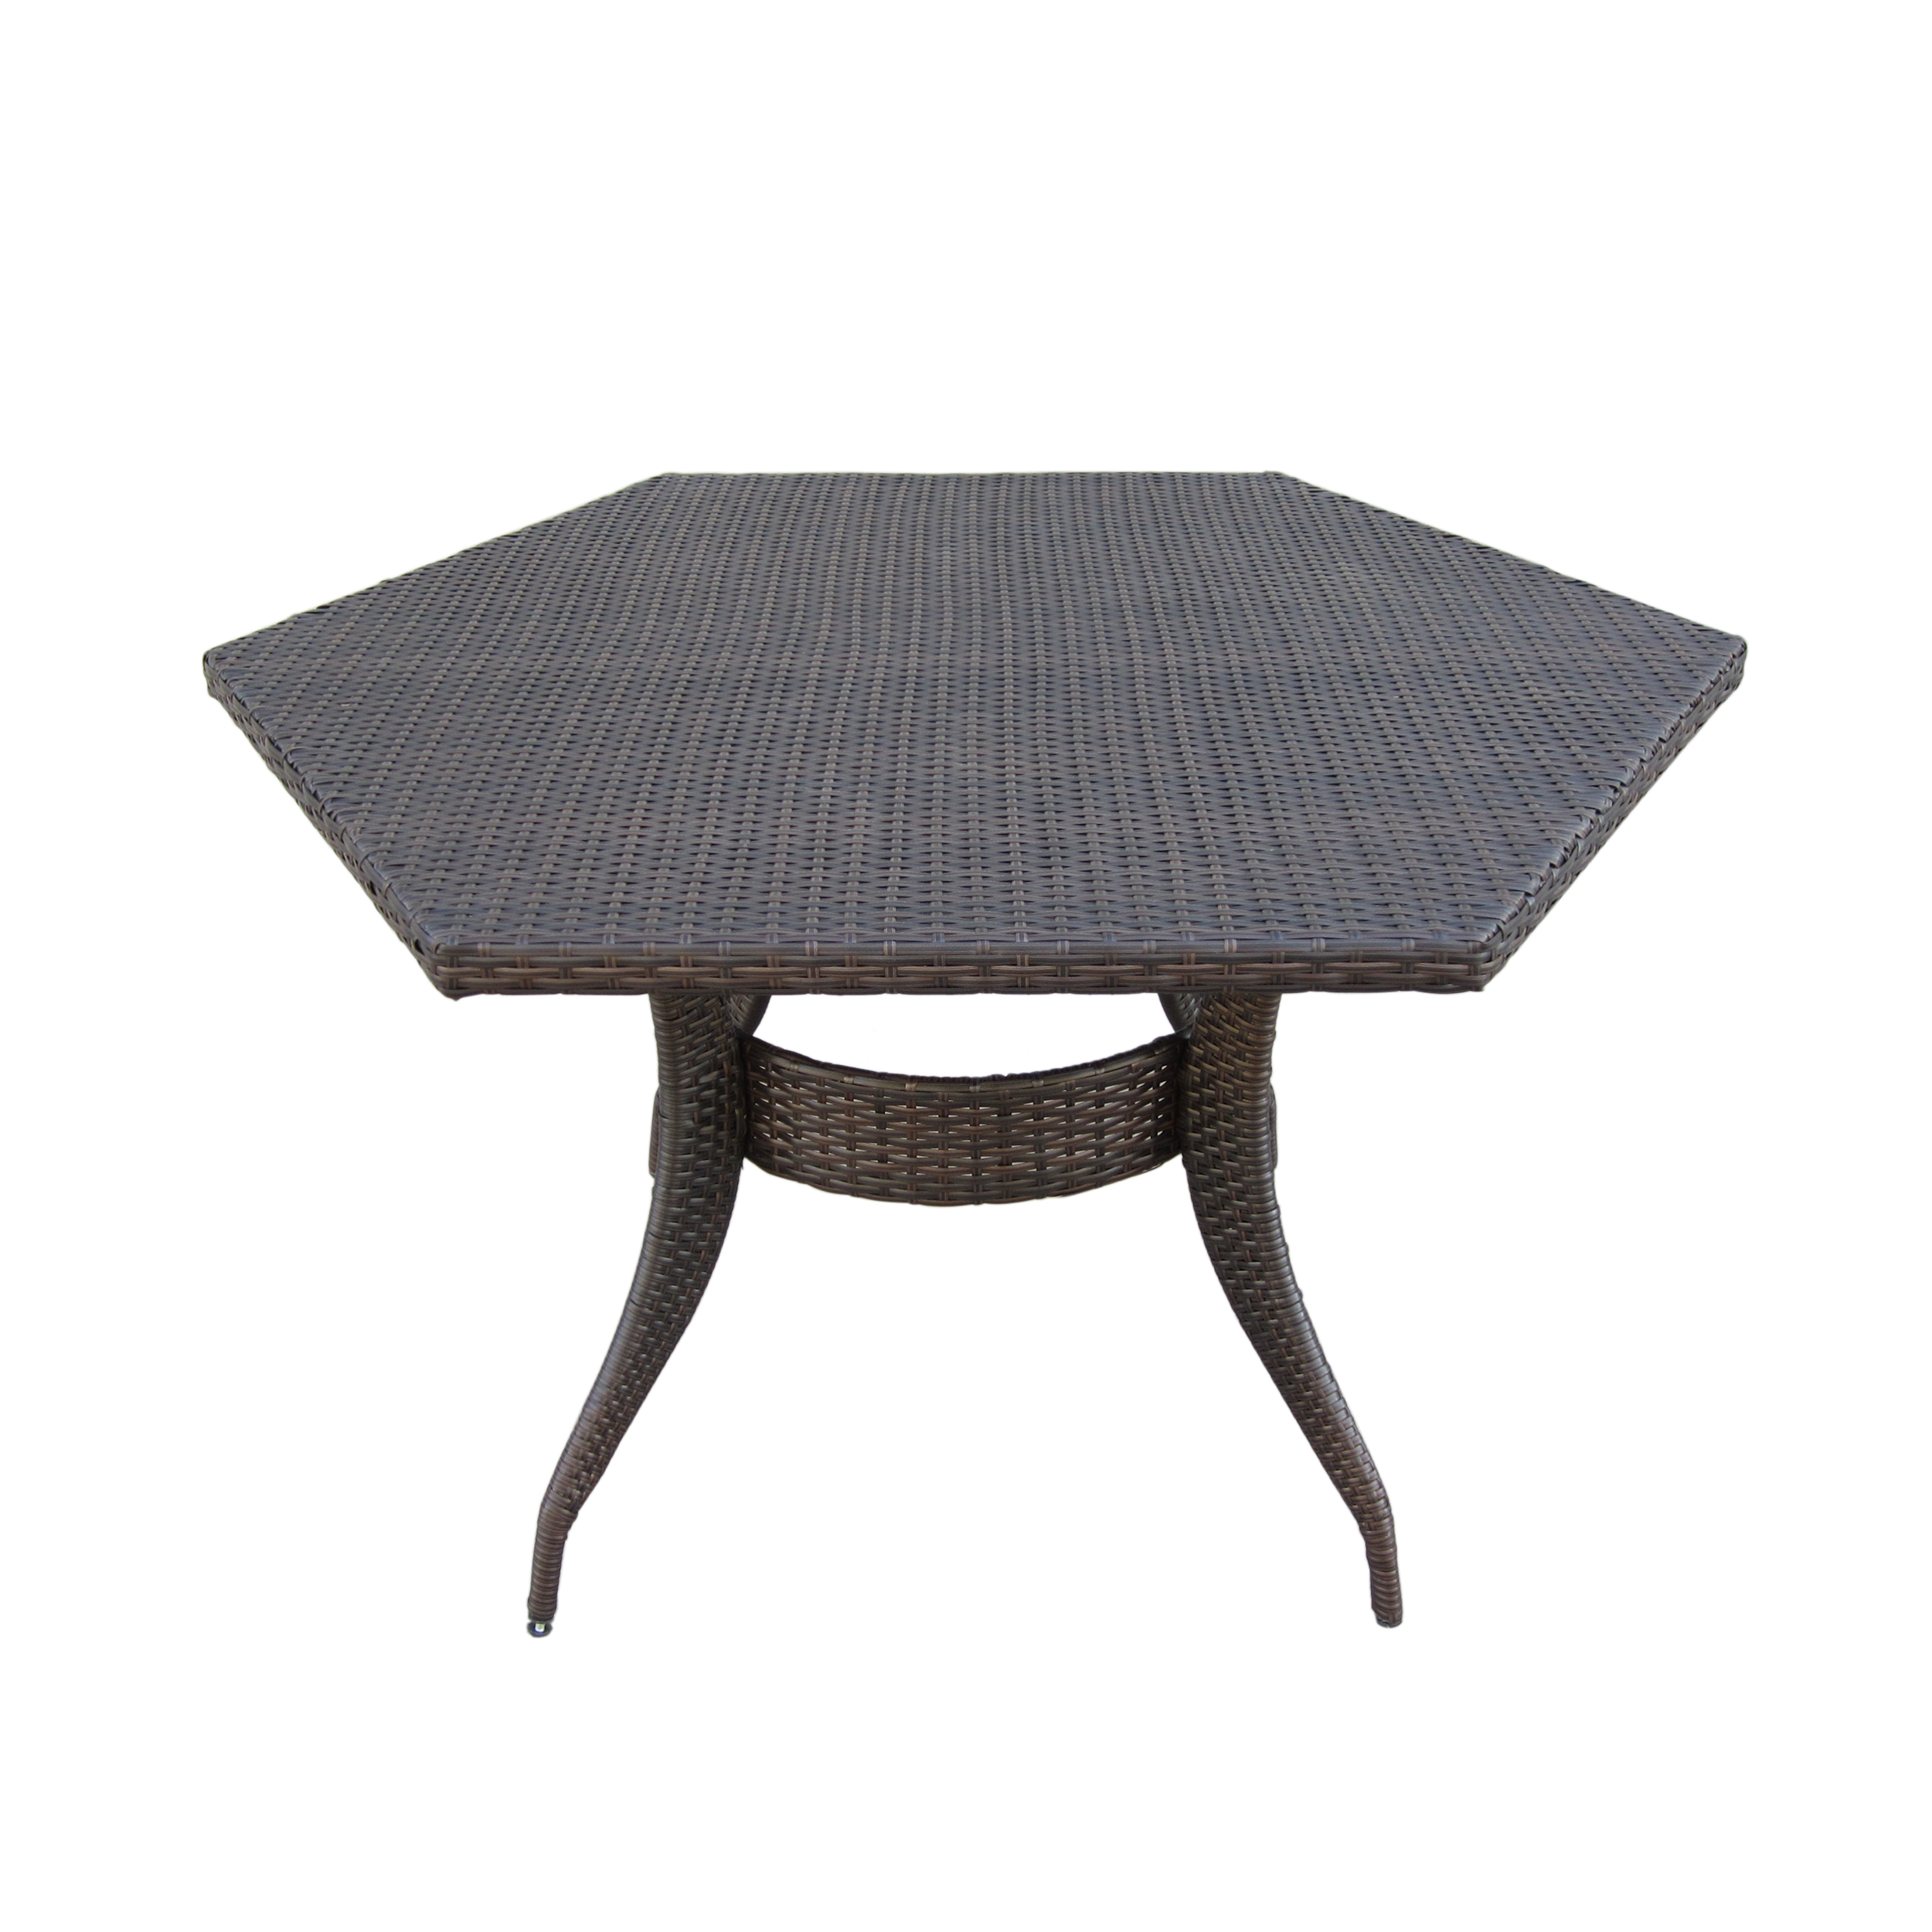 Outdoor 53-Inch Wicker Hexagon Dining Table, Multi Brown - image 2 of 9